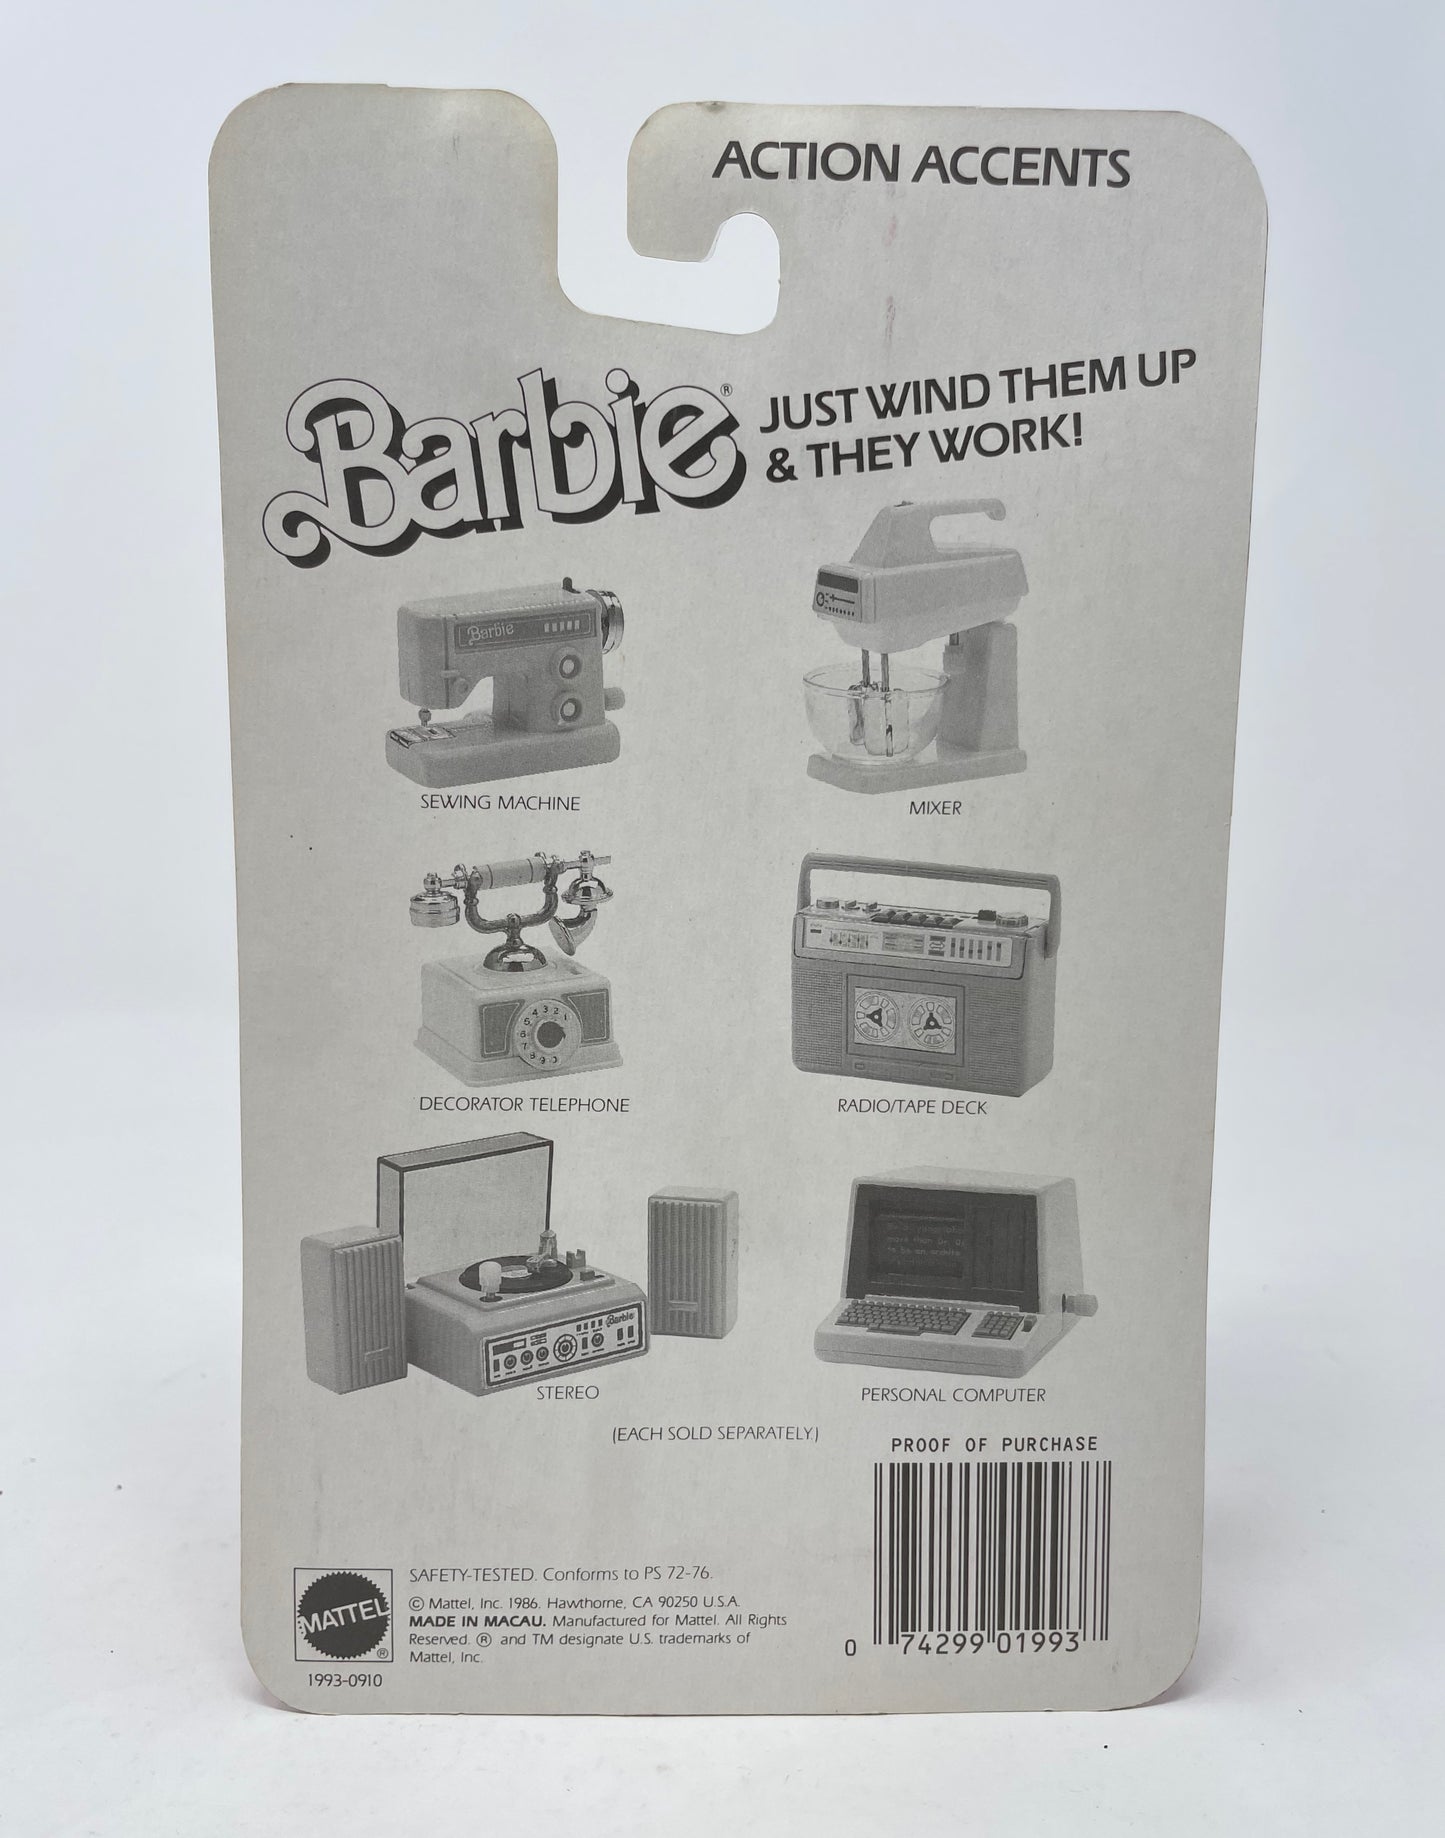 BARBIE ACTION ACCENTS STEREO #1993 - MATTEL 1986